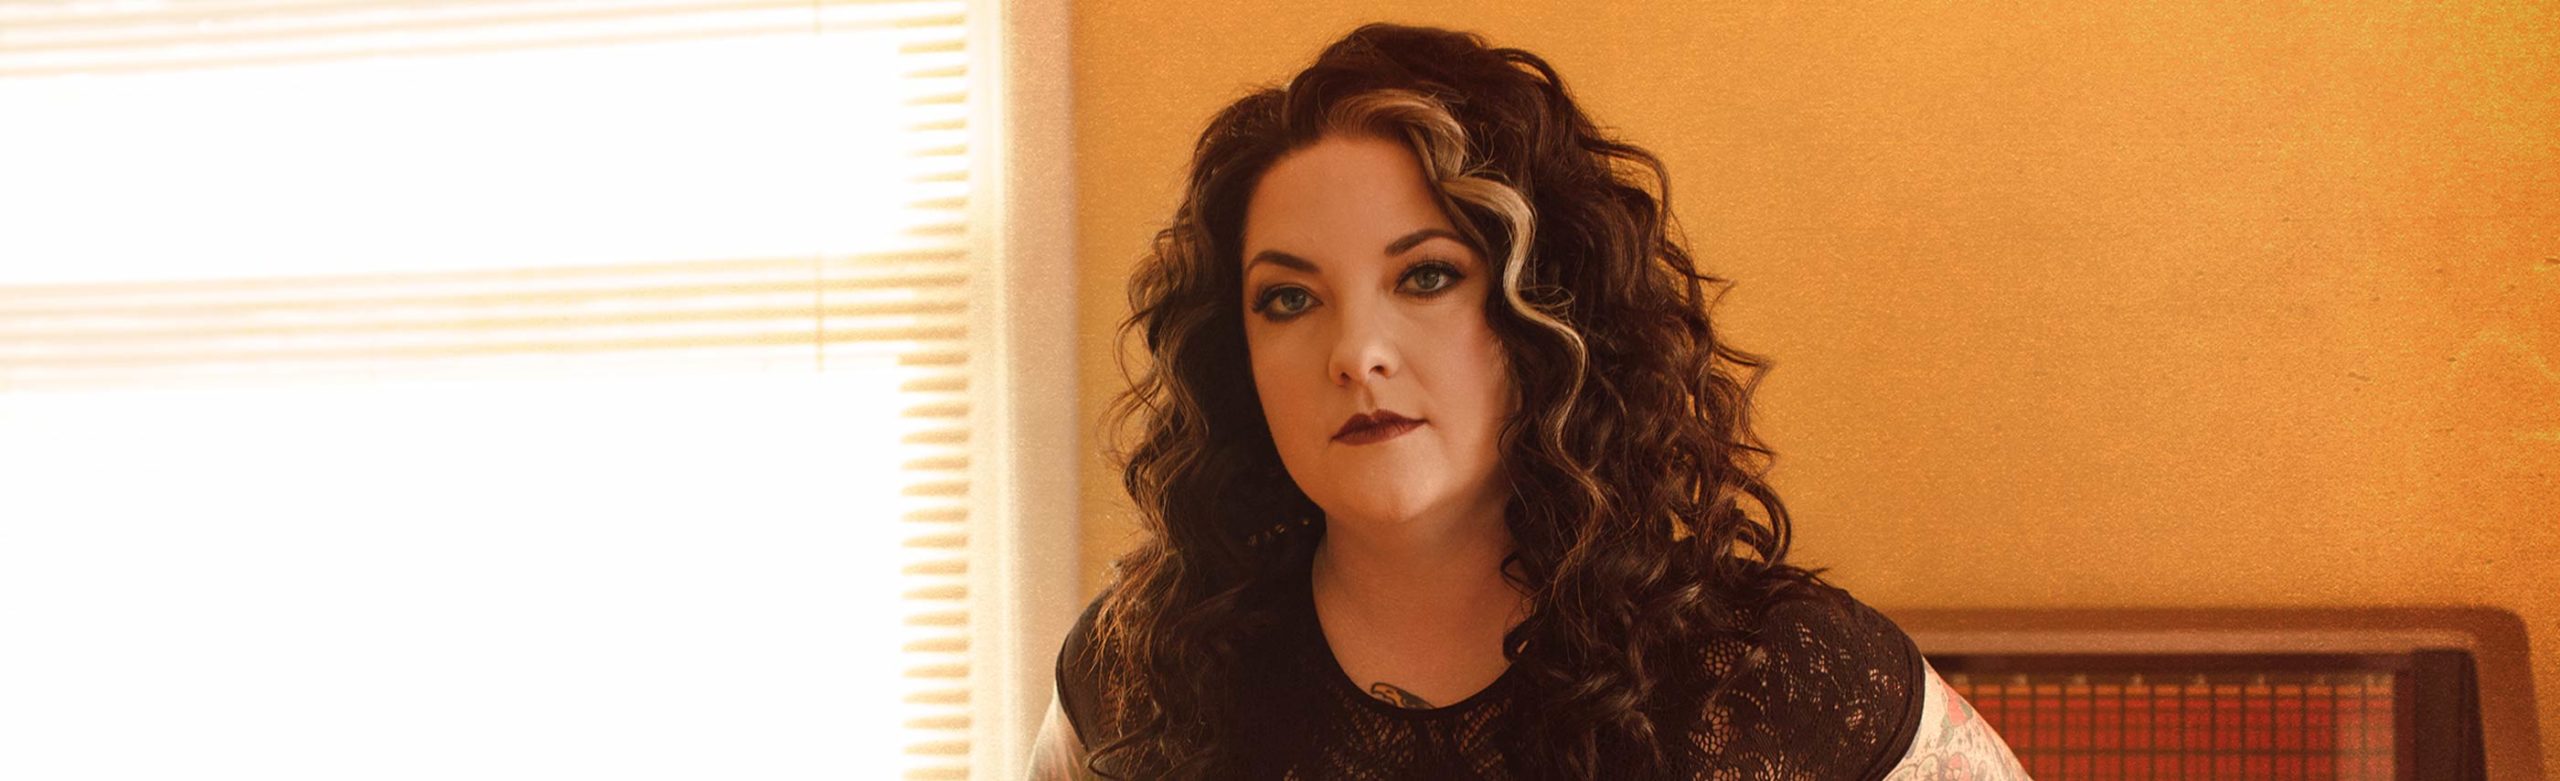 Ashley McBryde Reschedules Missoula Concert to Fall 2022 Image